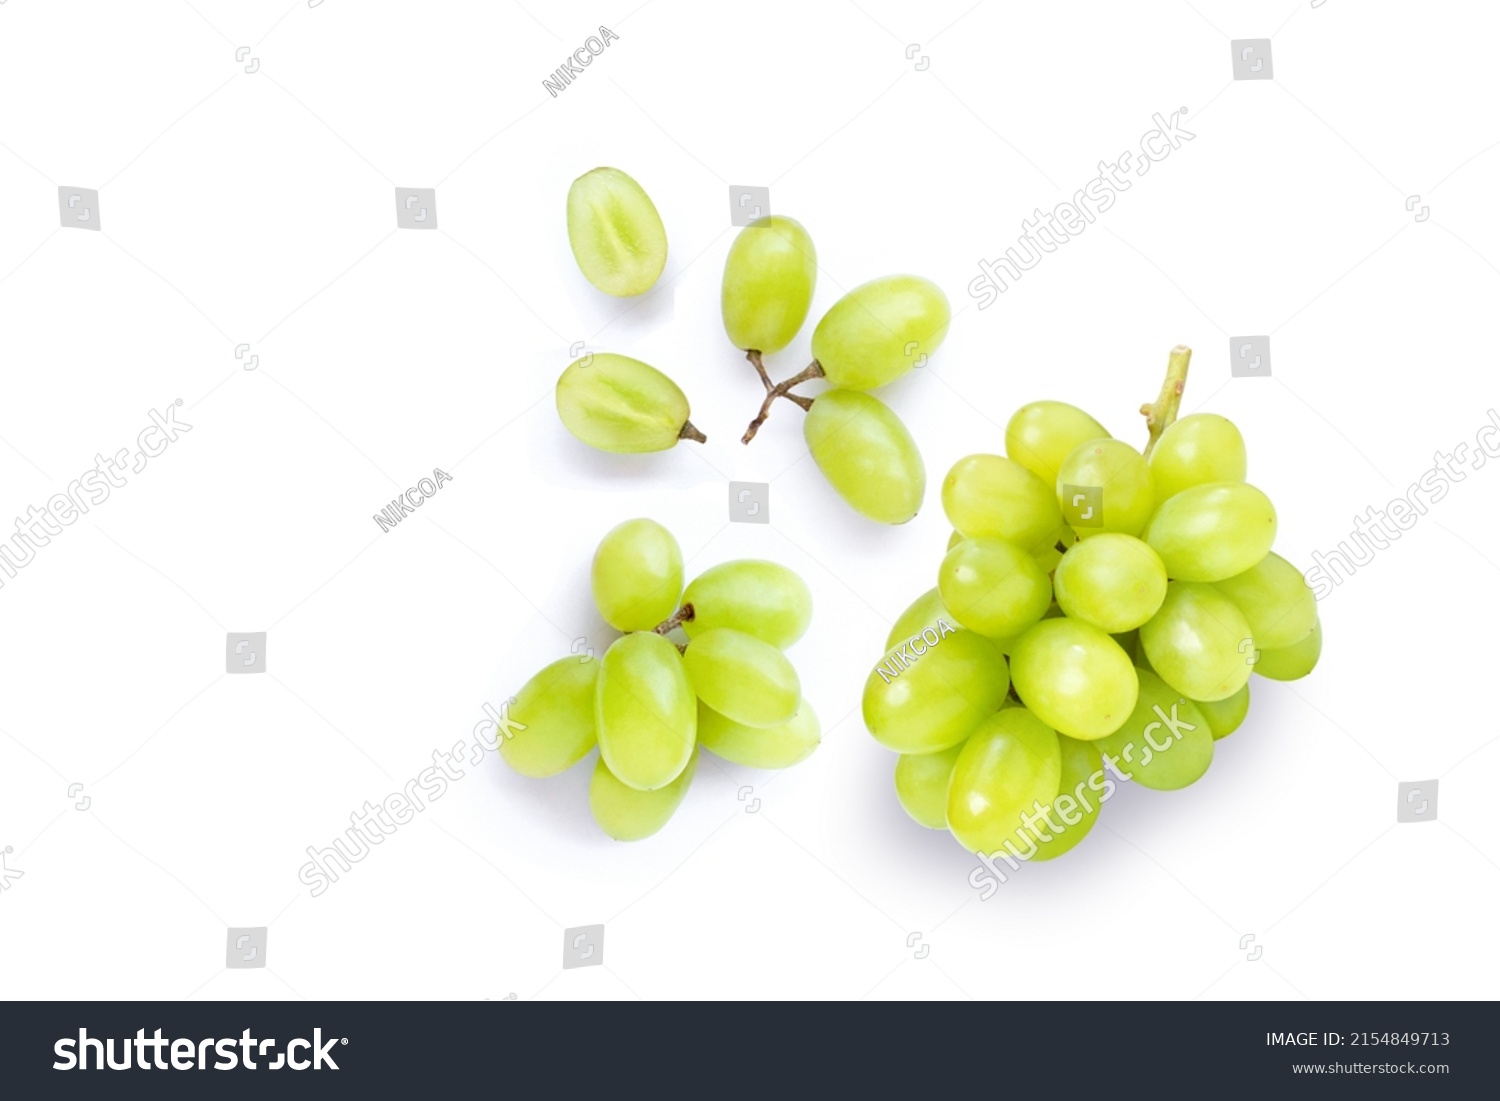 Green muscat grapes and half sliced isolated on white background. Top view. Flat lay. Grape pattern texture background.  #2154849713